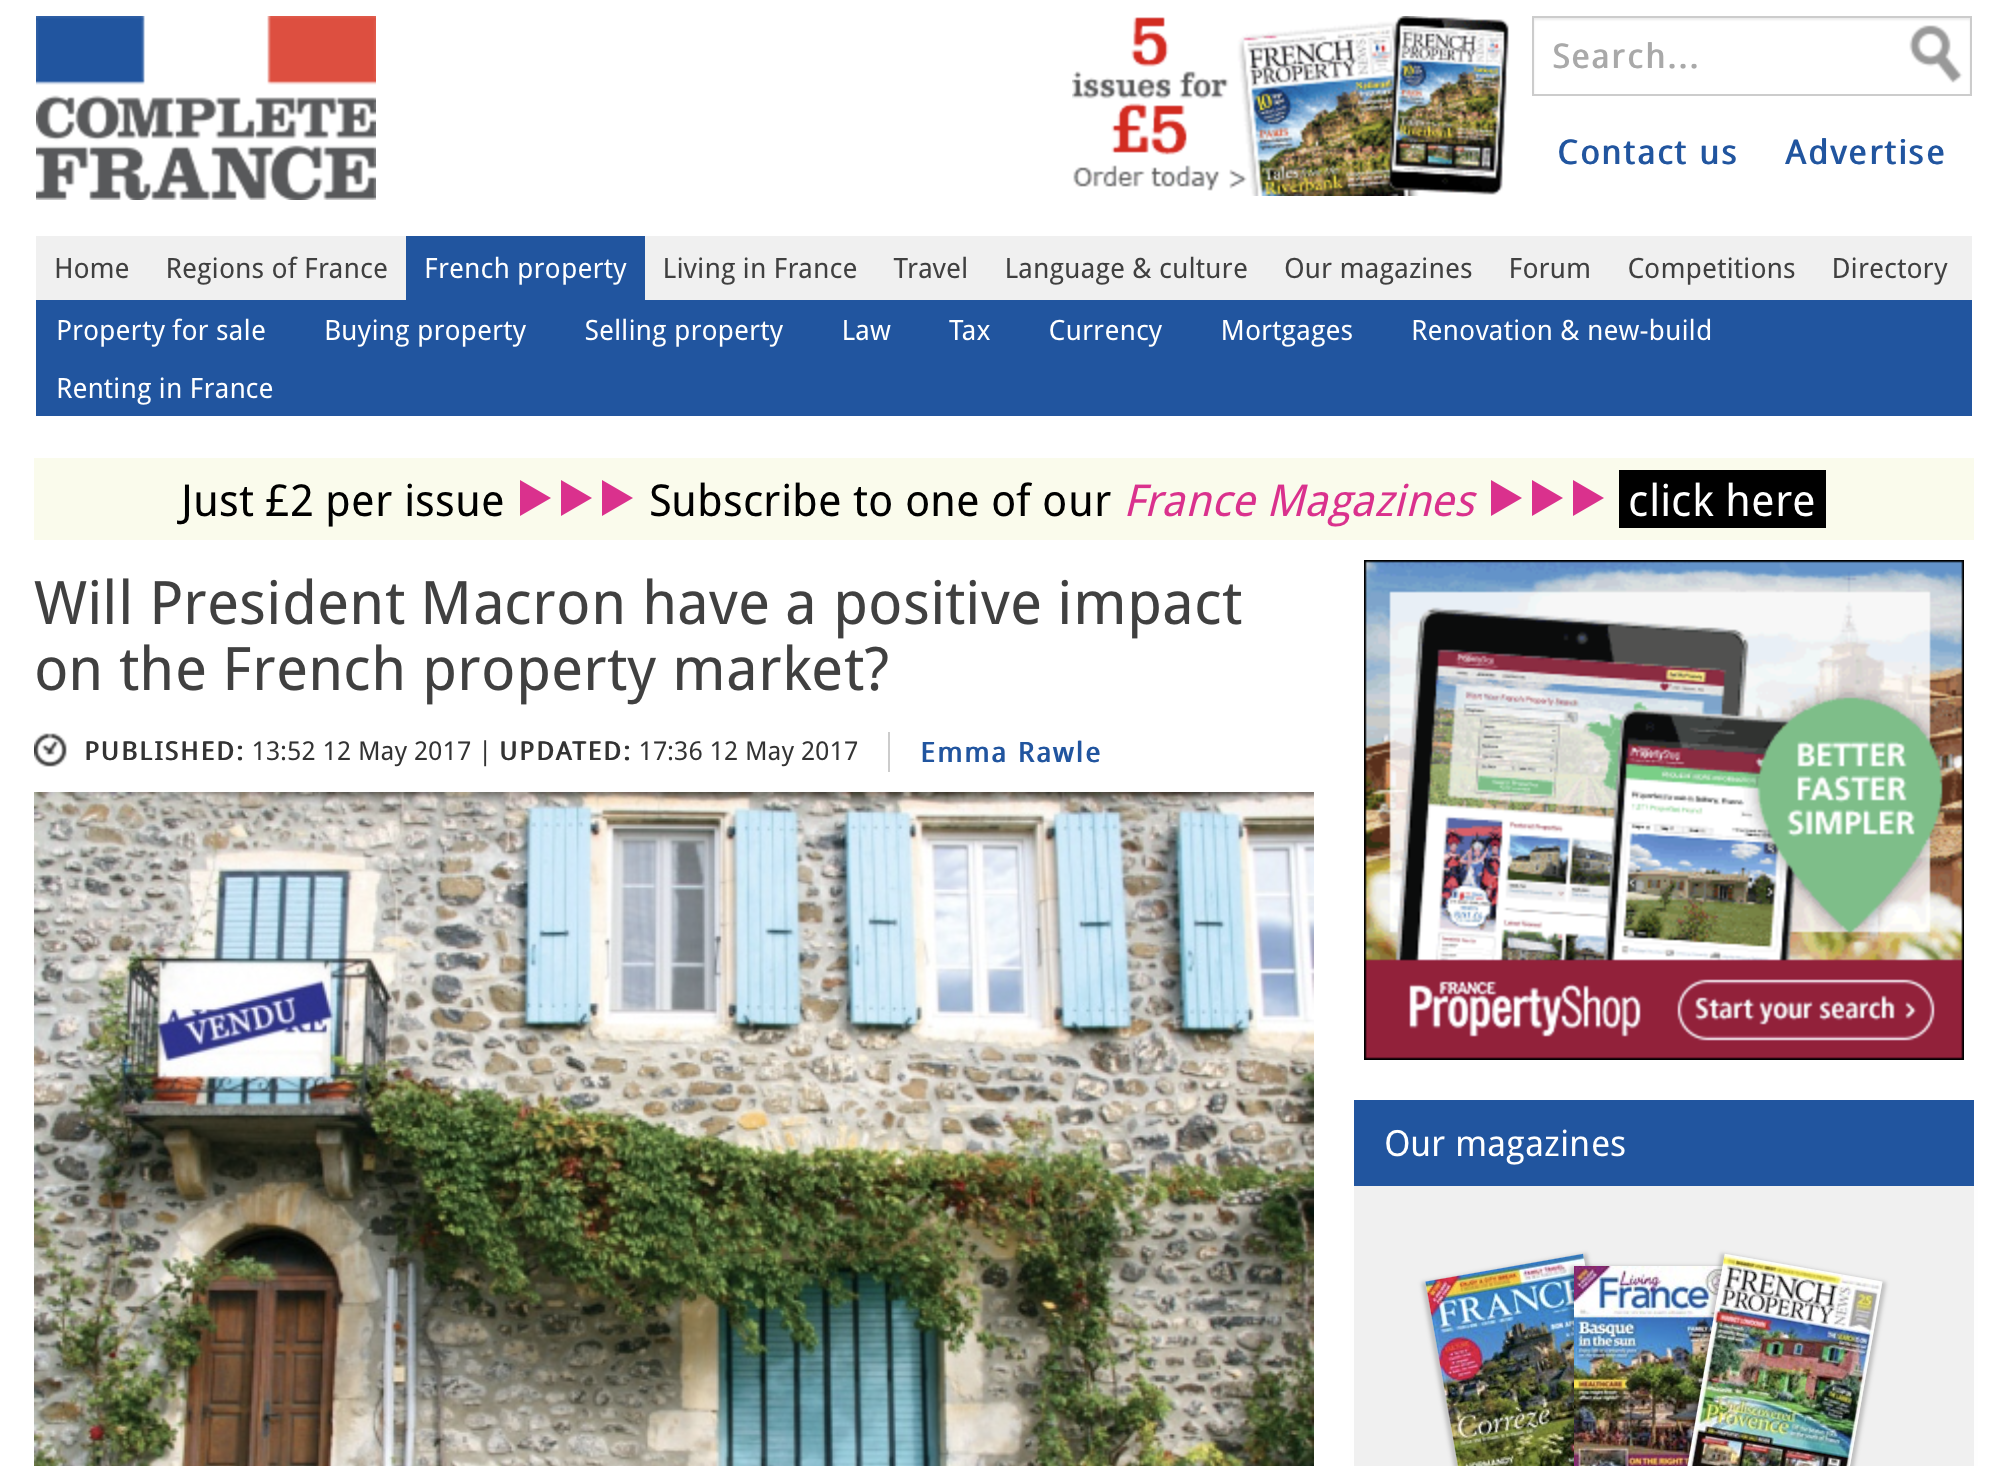 French Property News – Will President Macron have a positive impact on France’s property market